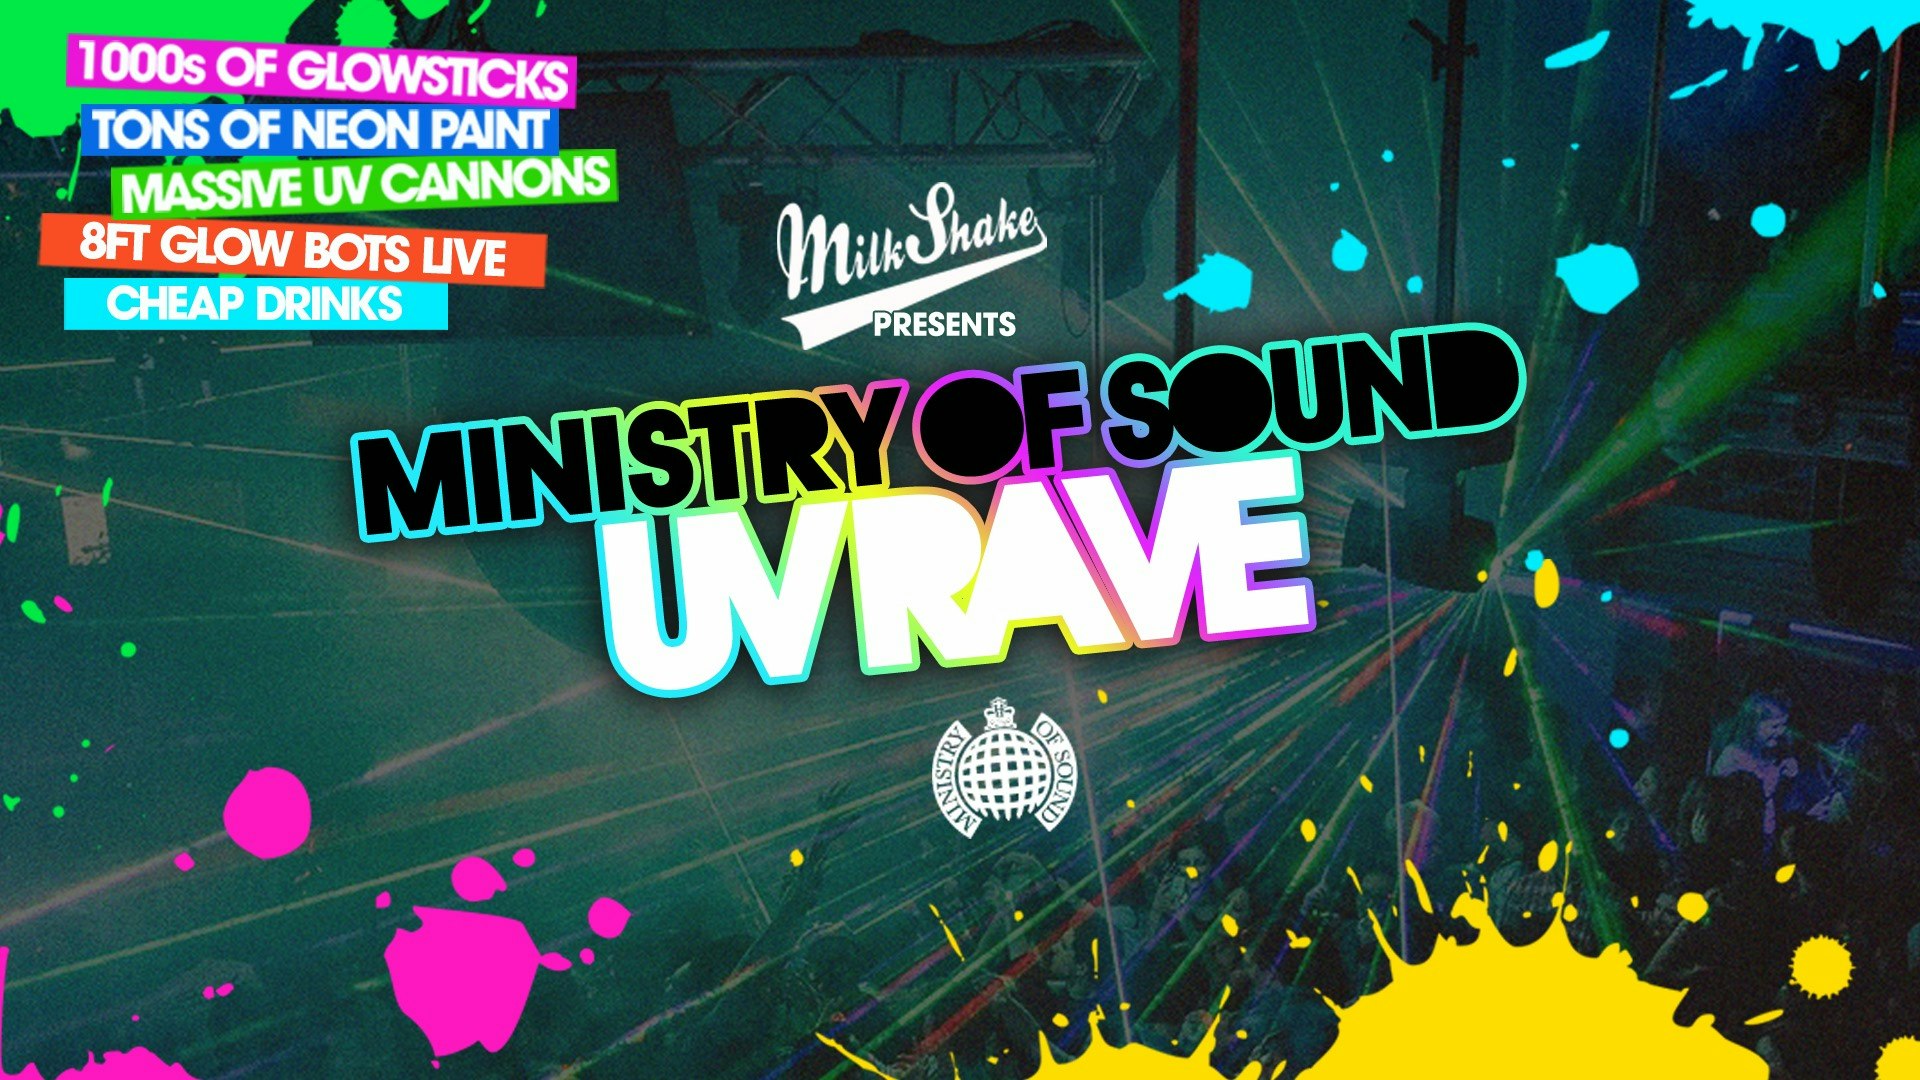 ⛔️ SOLD OUT⛔️  The Milkshake, Ministry of Sound UV Rave ⚡ 2023 – 🔋 END OF TERM 🔋 ⛔️ SOLD OUT⛔️